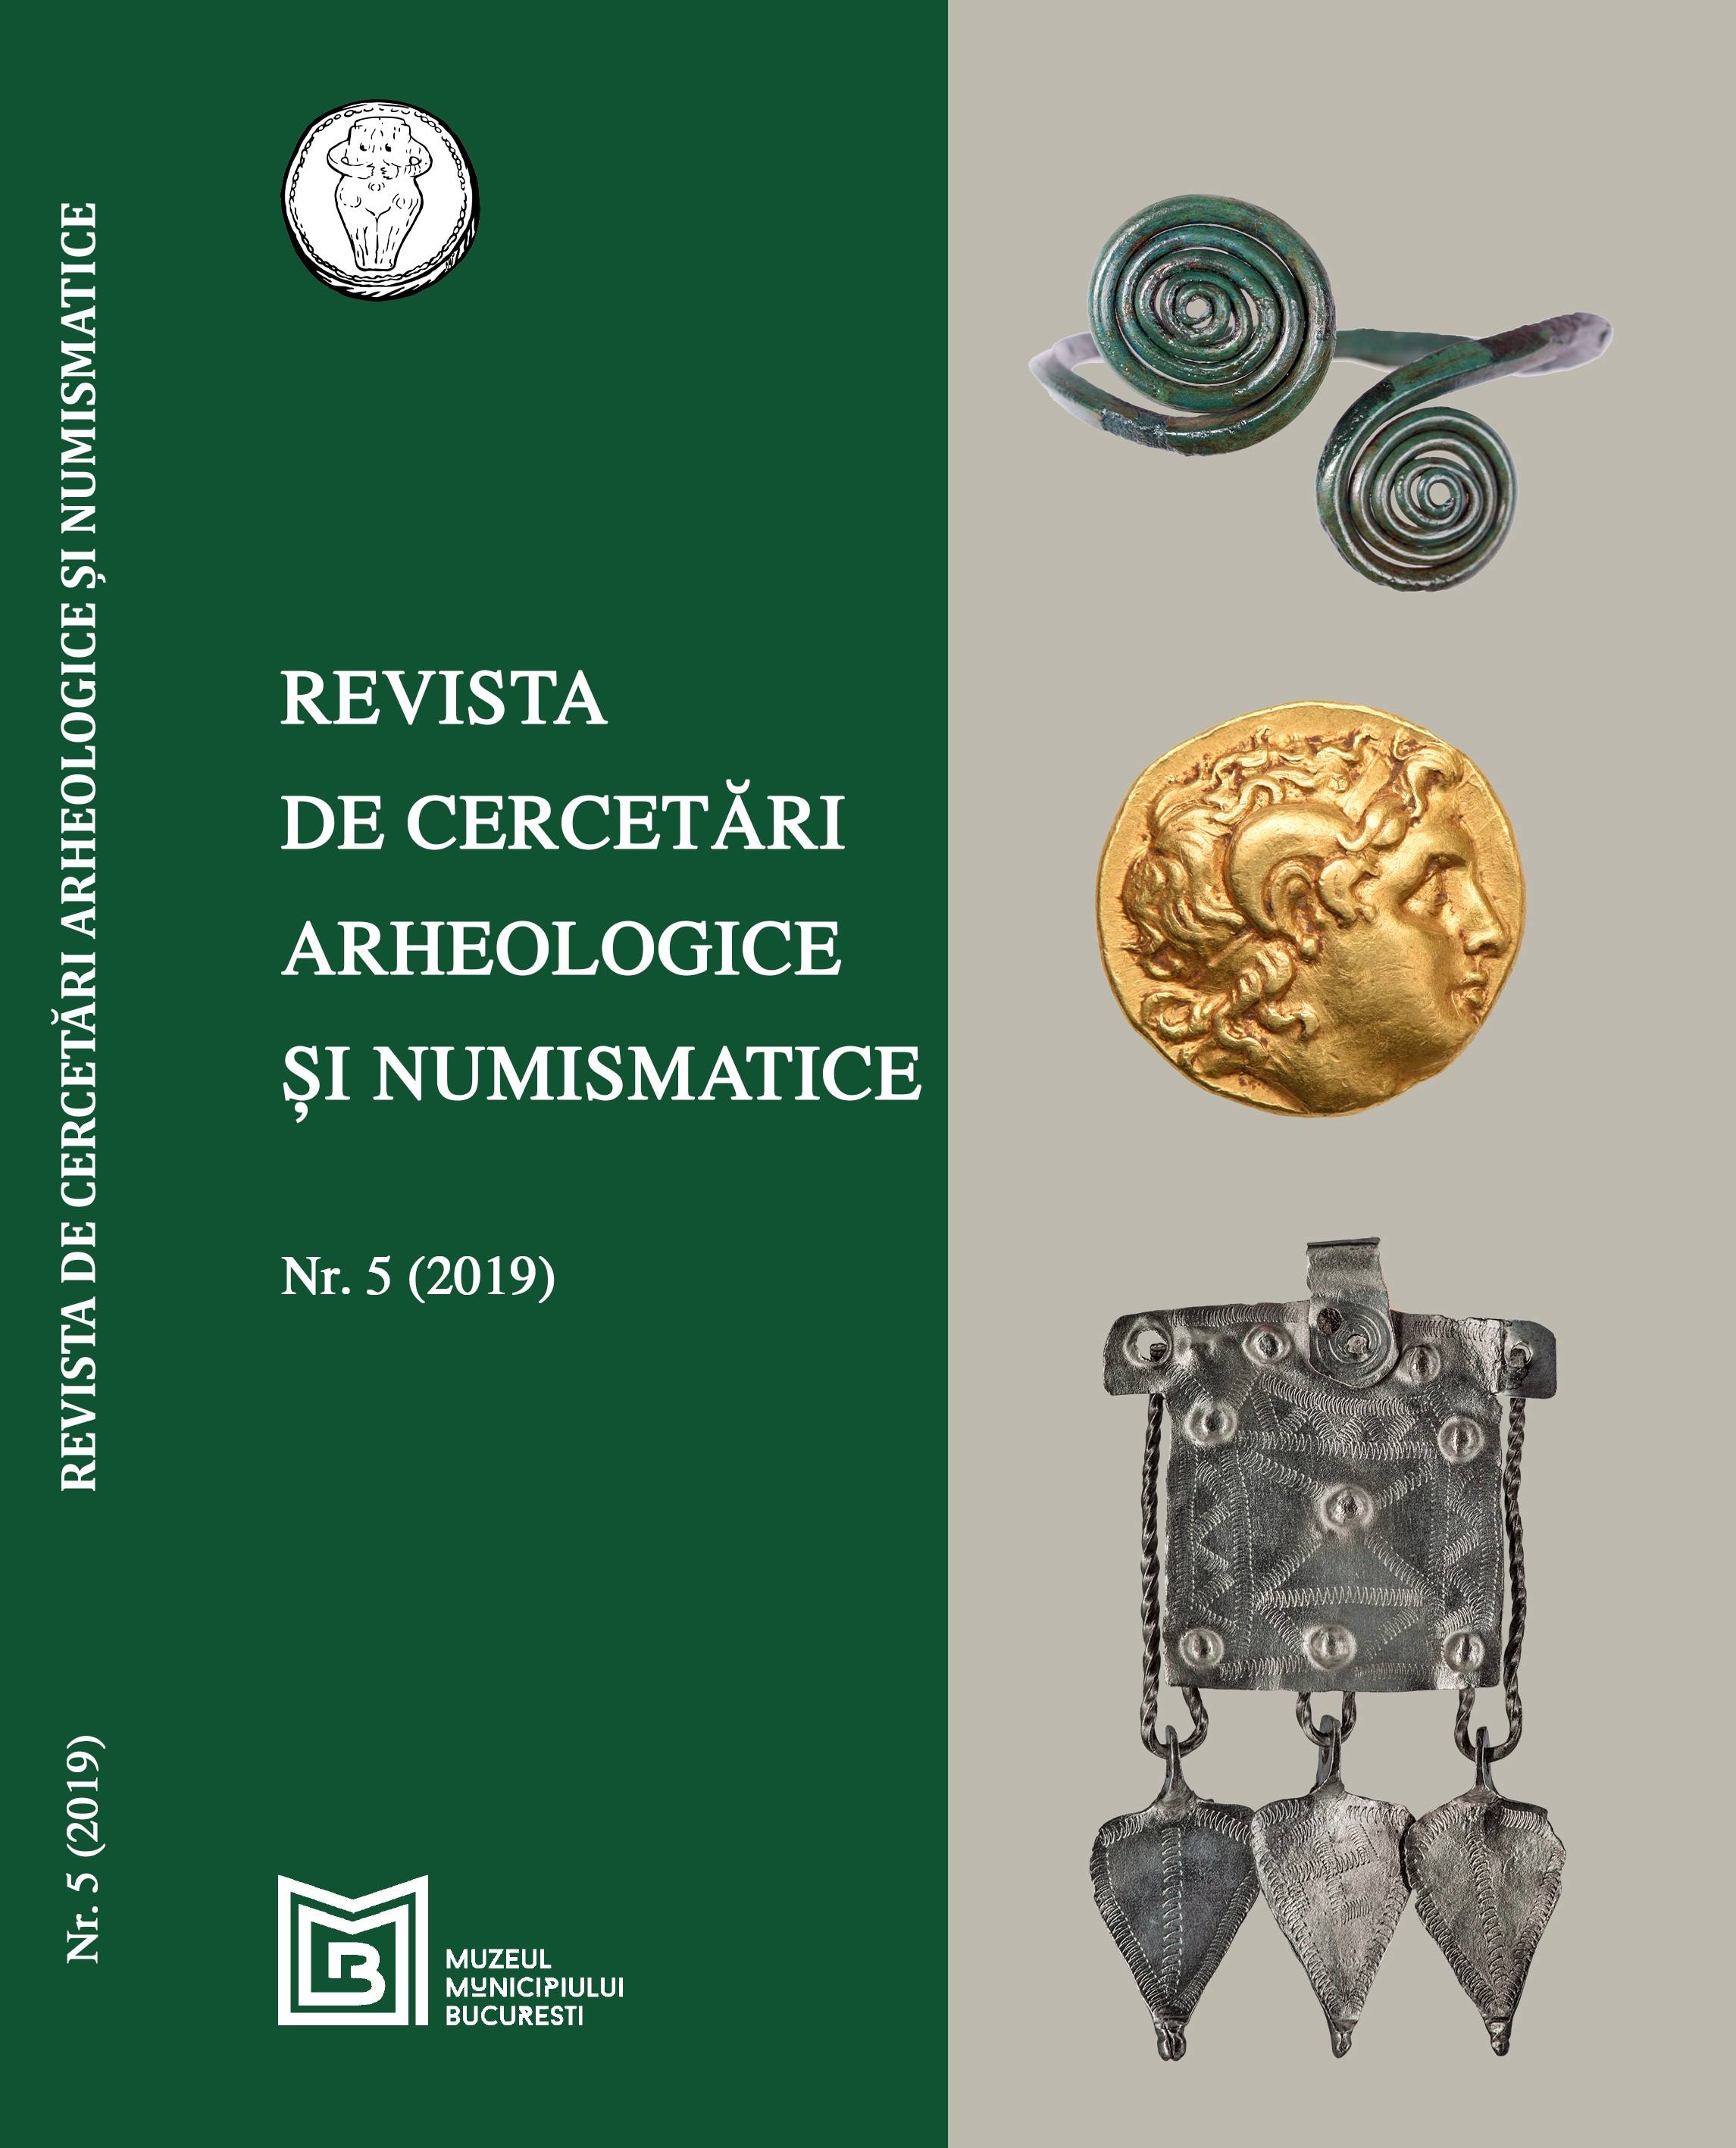 Some remarks about monetary policy in the reign of byzantine emperors Phocas (602-610) and Heraclius (610-641) Cover Image